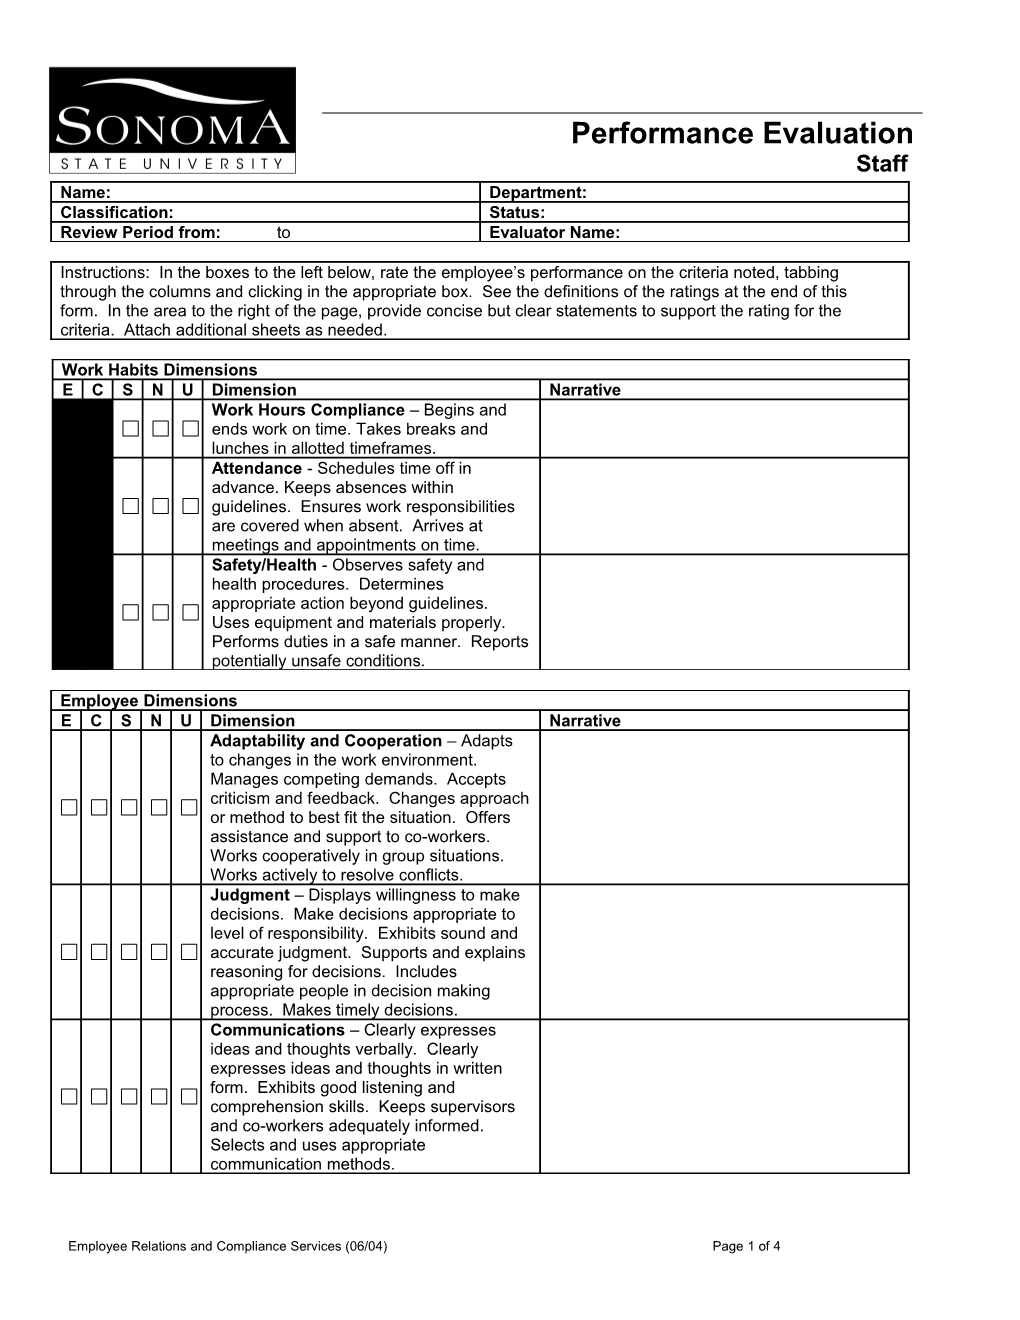 Employee Relations and Compliance Services (06/04) Page 1 of 4